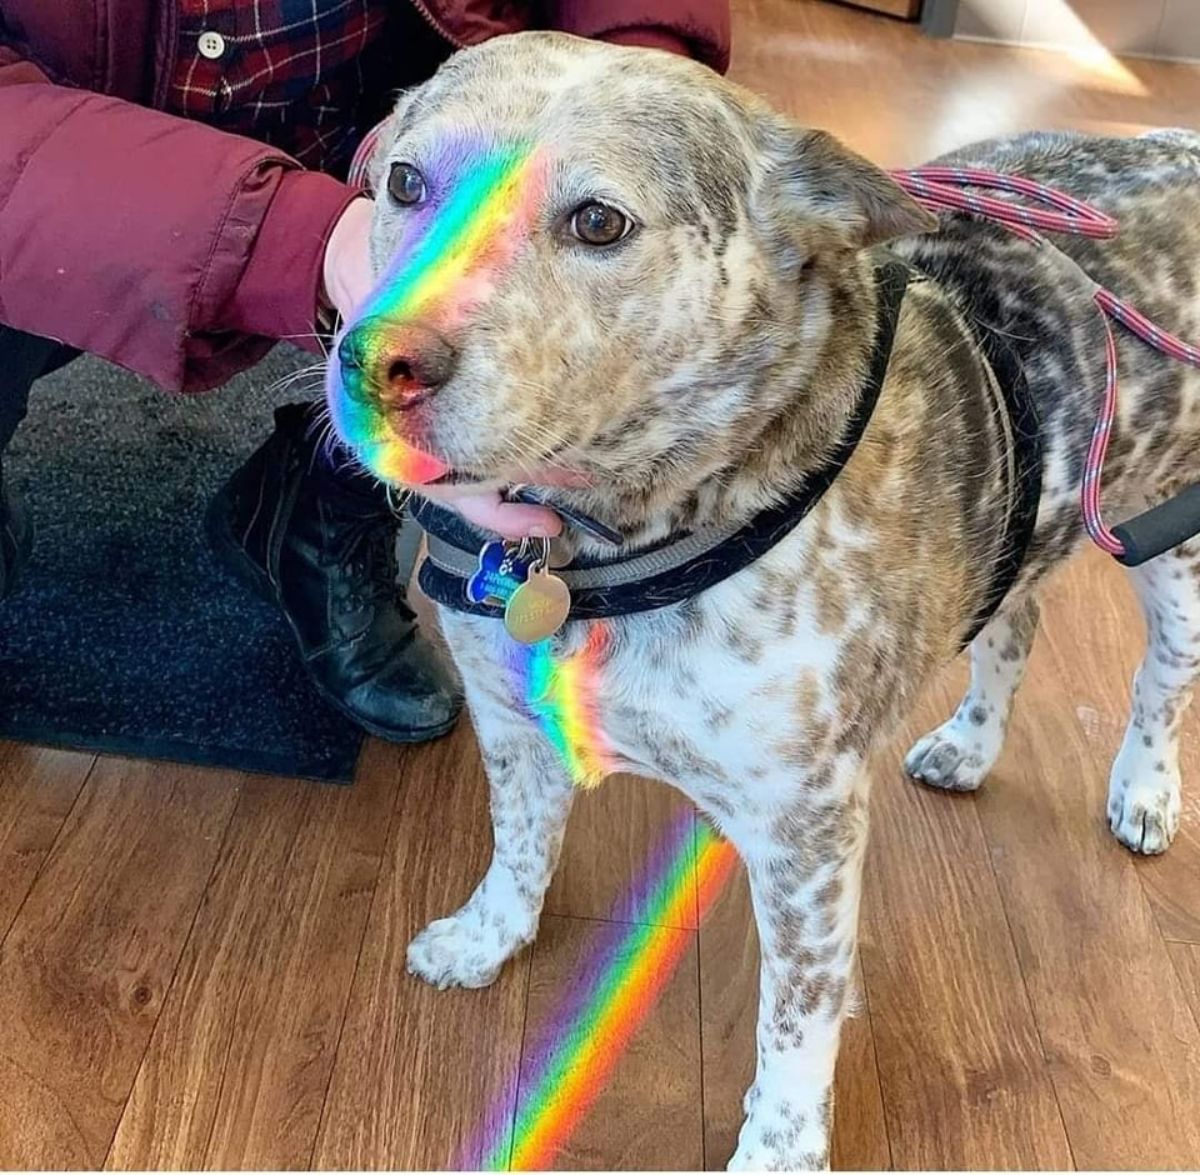 black and white dog standing on wooden floor with a rainbow from a prism is reflected on the middle of the dog's face and chest and on the floor